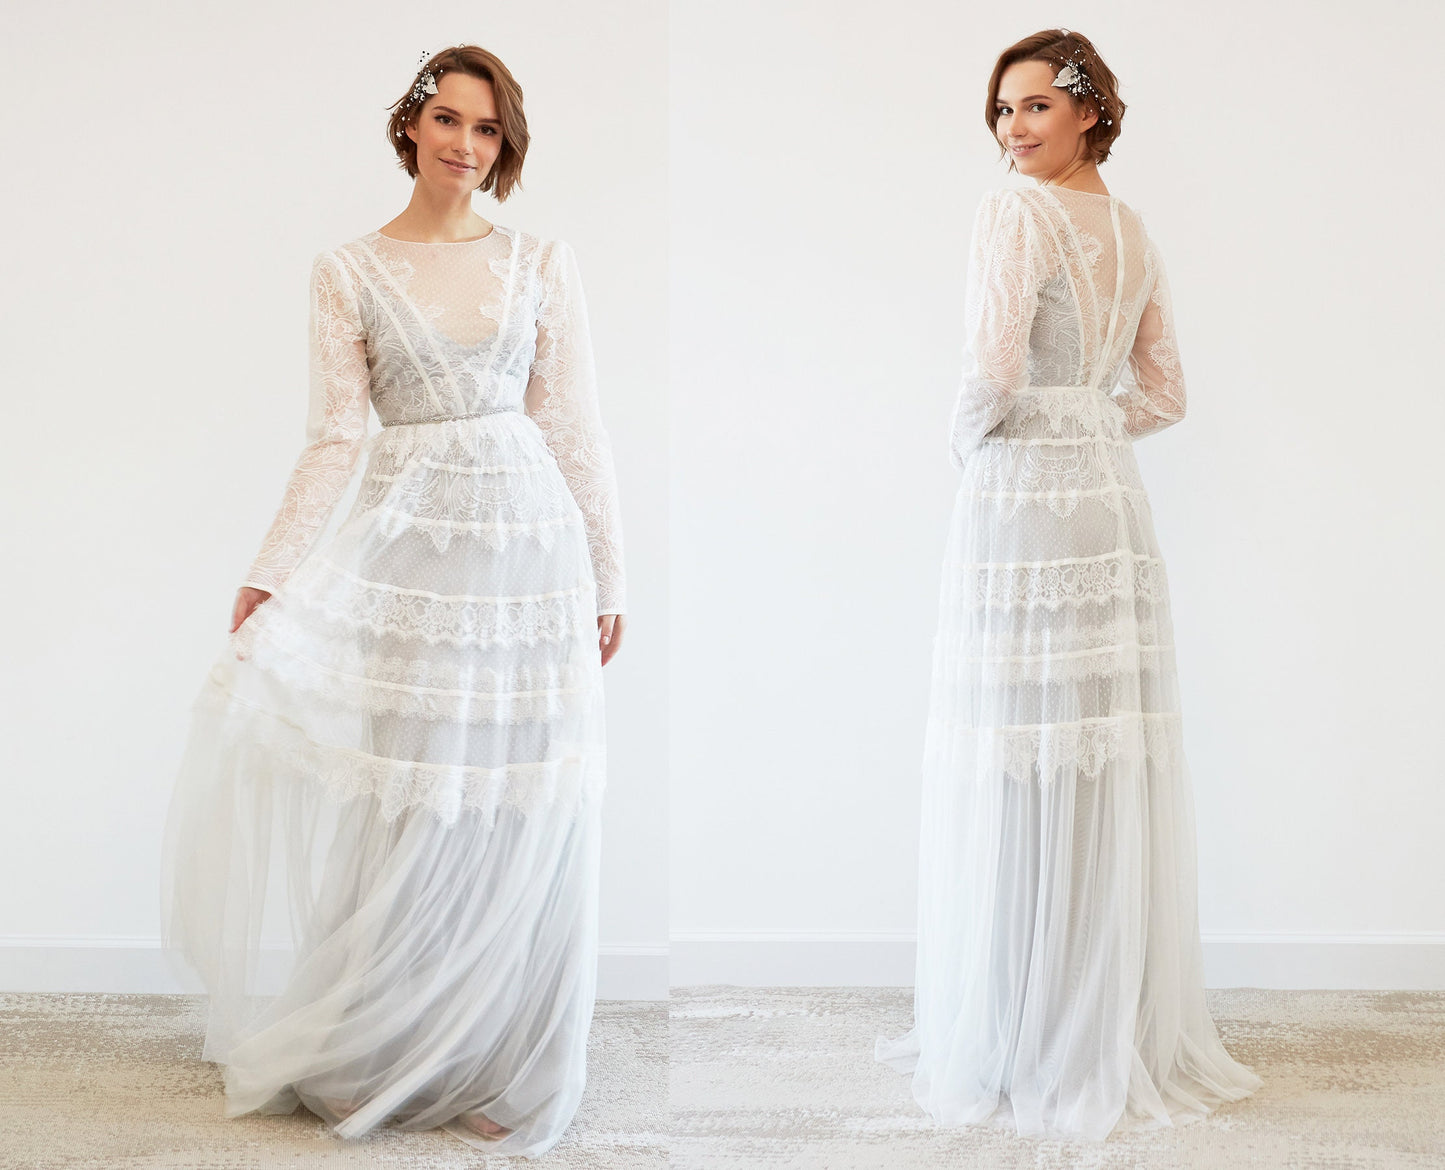 Lace wedding dress with sleeves/ Kalisia